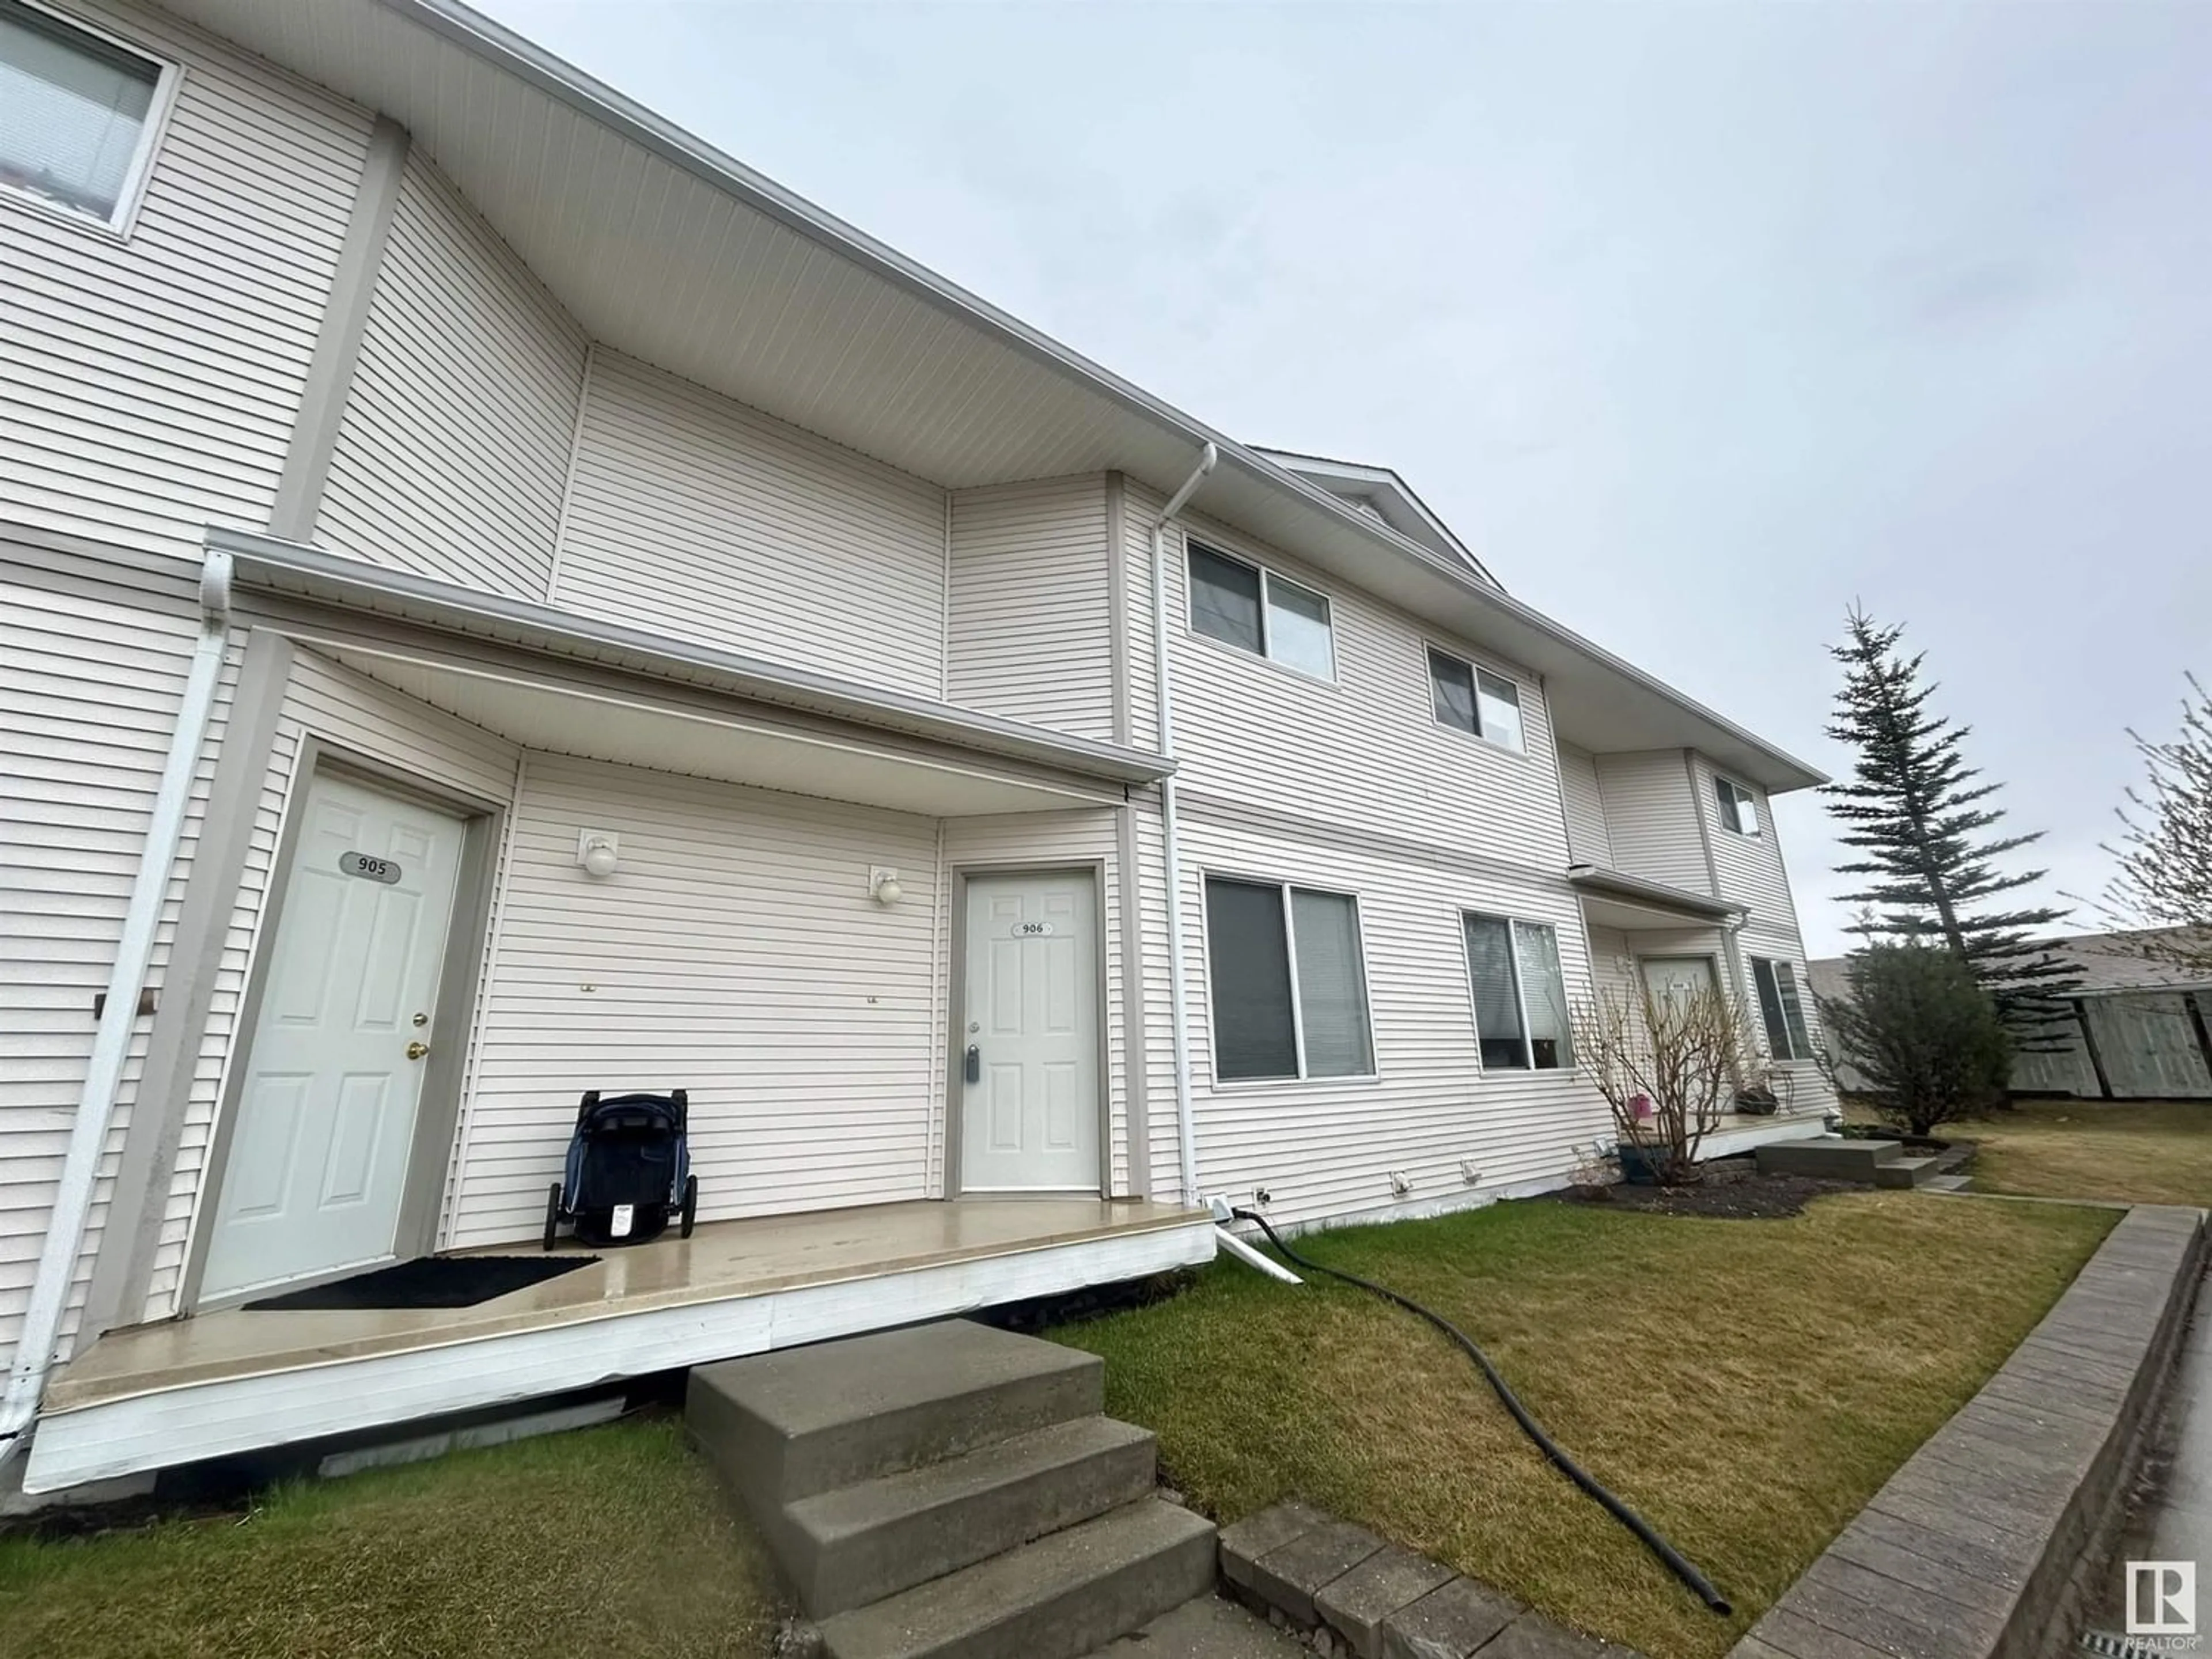 A pic from exterior of the house or condo for #906 610 KING ST, Spruce Grove Alberta T7X4J9